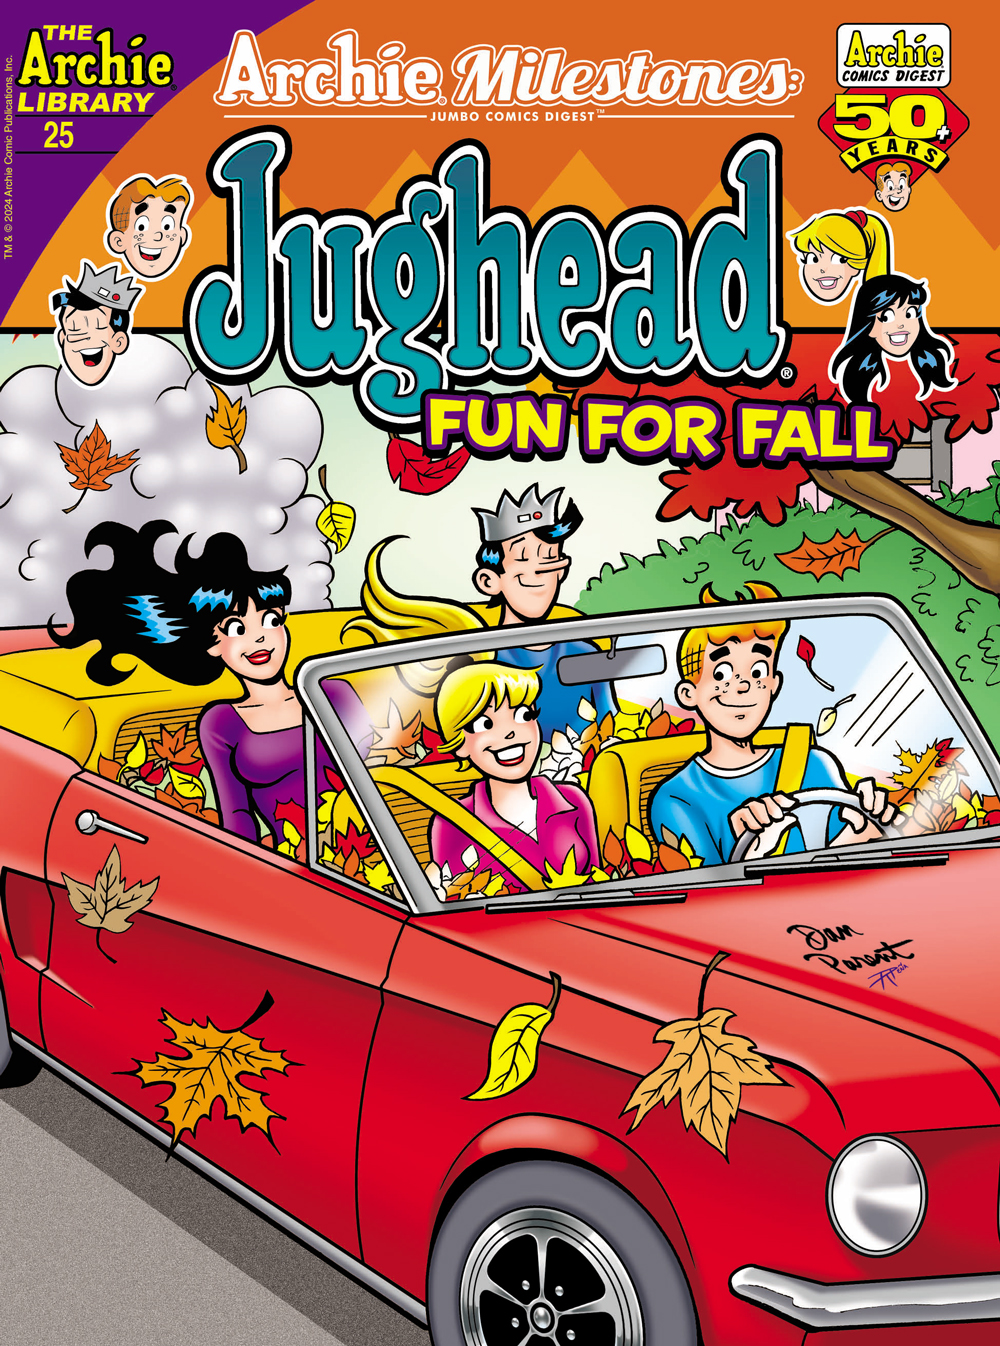 Archie, Betty, Veronica, and Jughead drive through a fall scene with the top down in Archie's convertible. Leaves fall all around them.